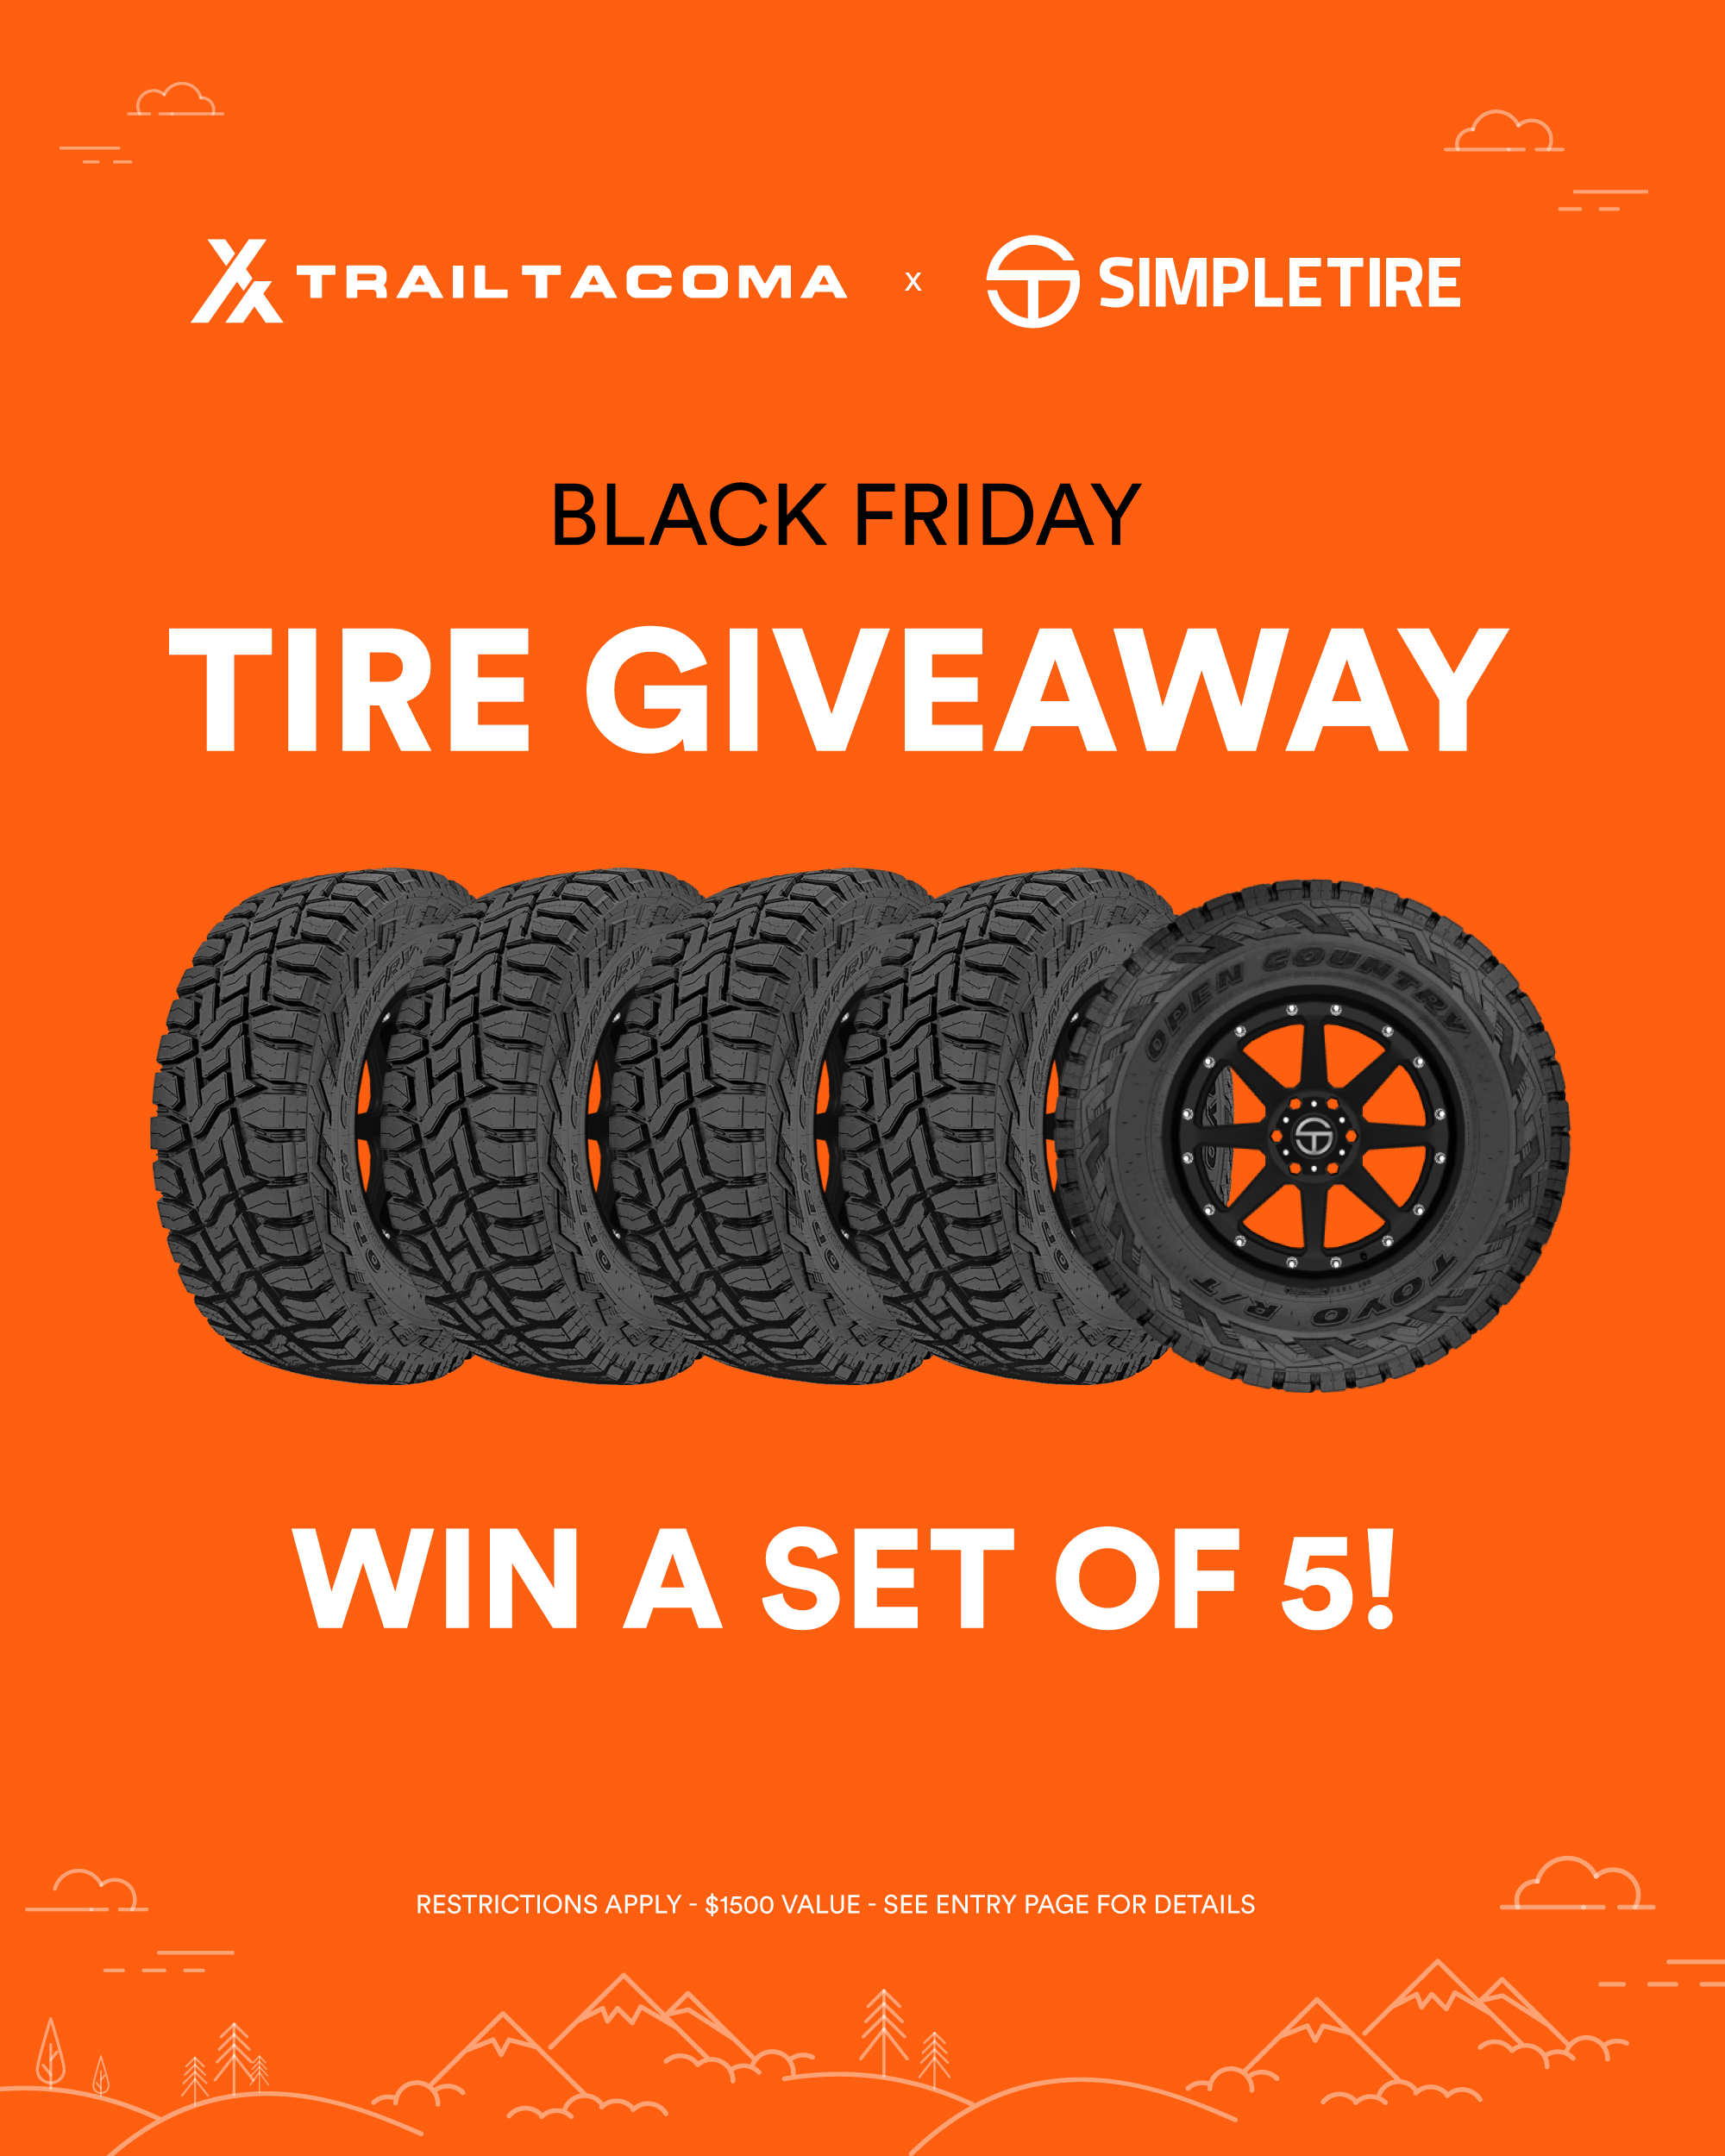 Trail & Simple Tire Black Friday Giveaway Tire Giveaway